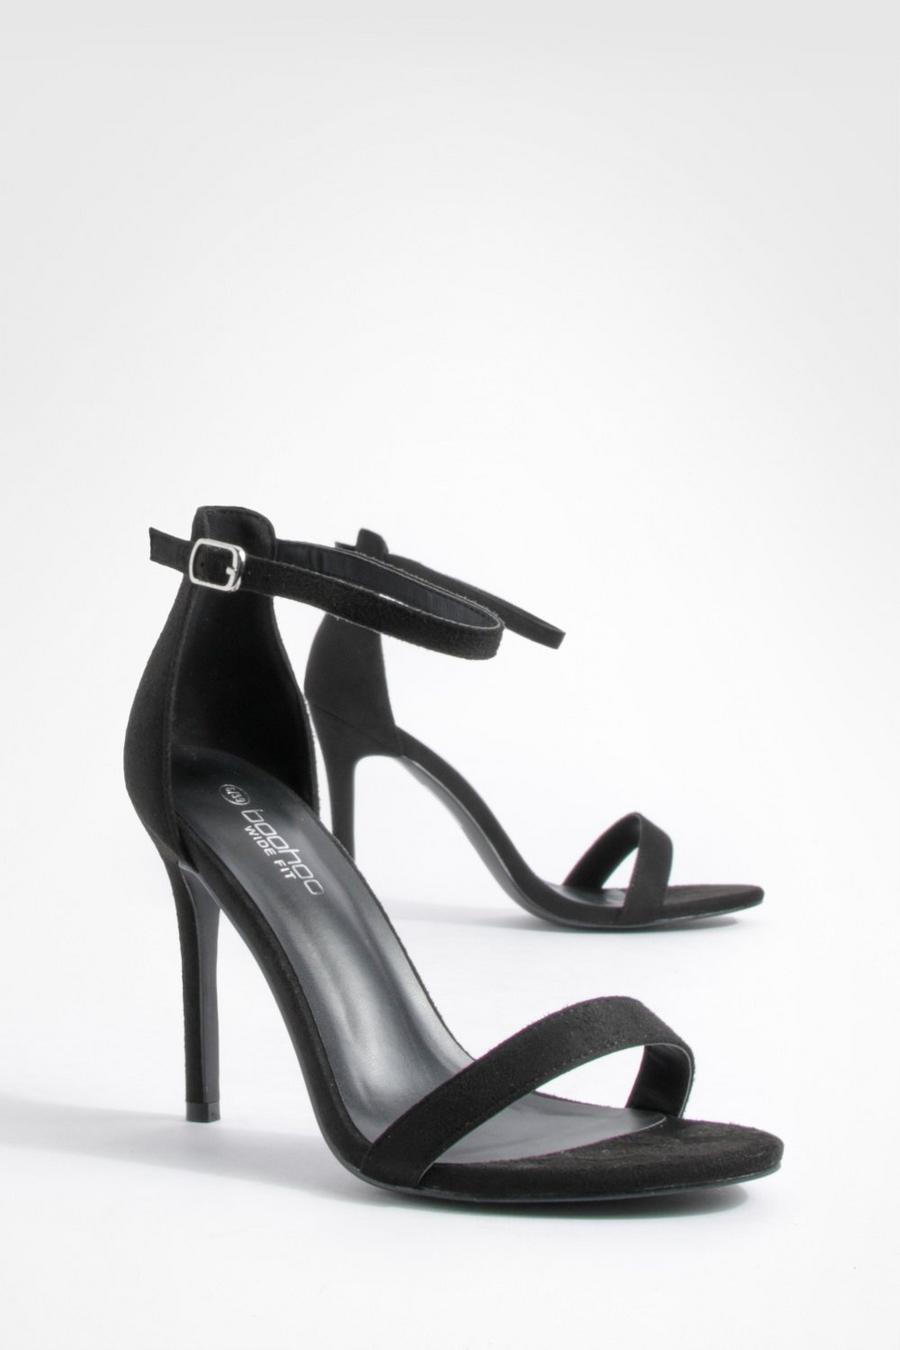 Black Wide Width Barely There Basic Heels